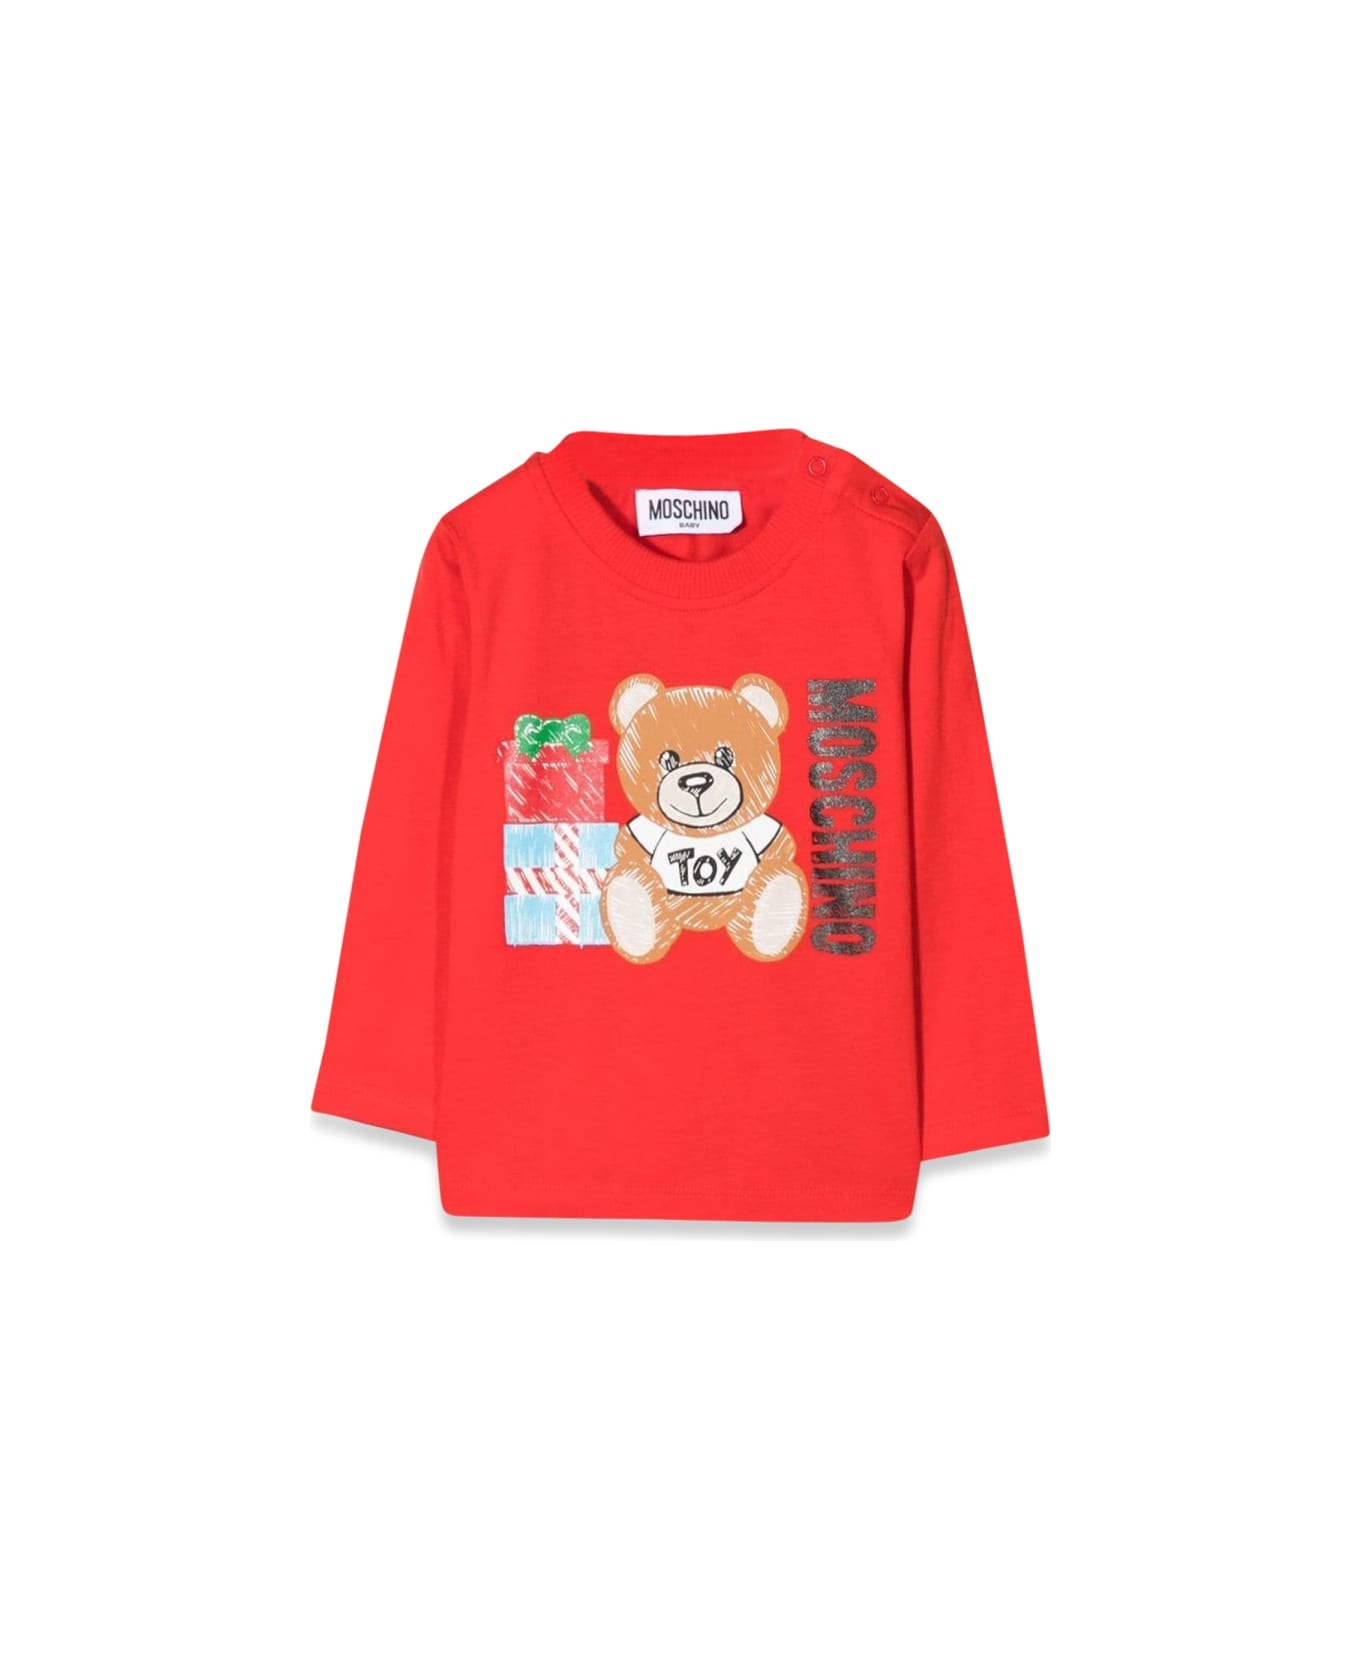 Moschino T-shirt M/l Teddy Bear Gifts - RED